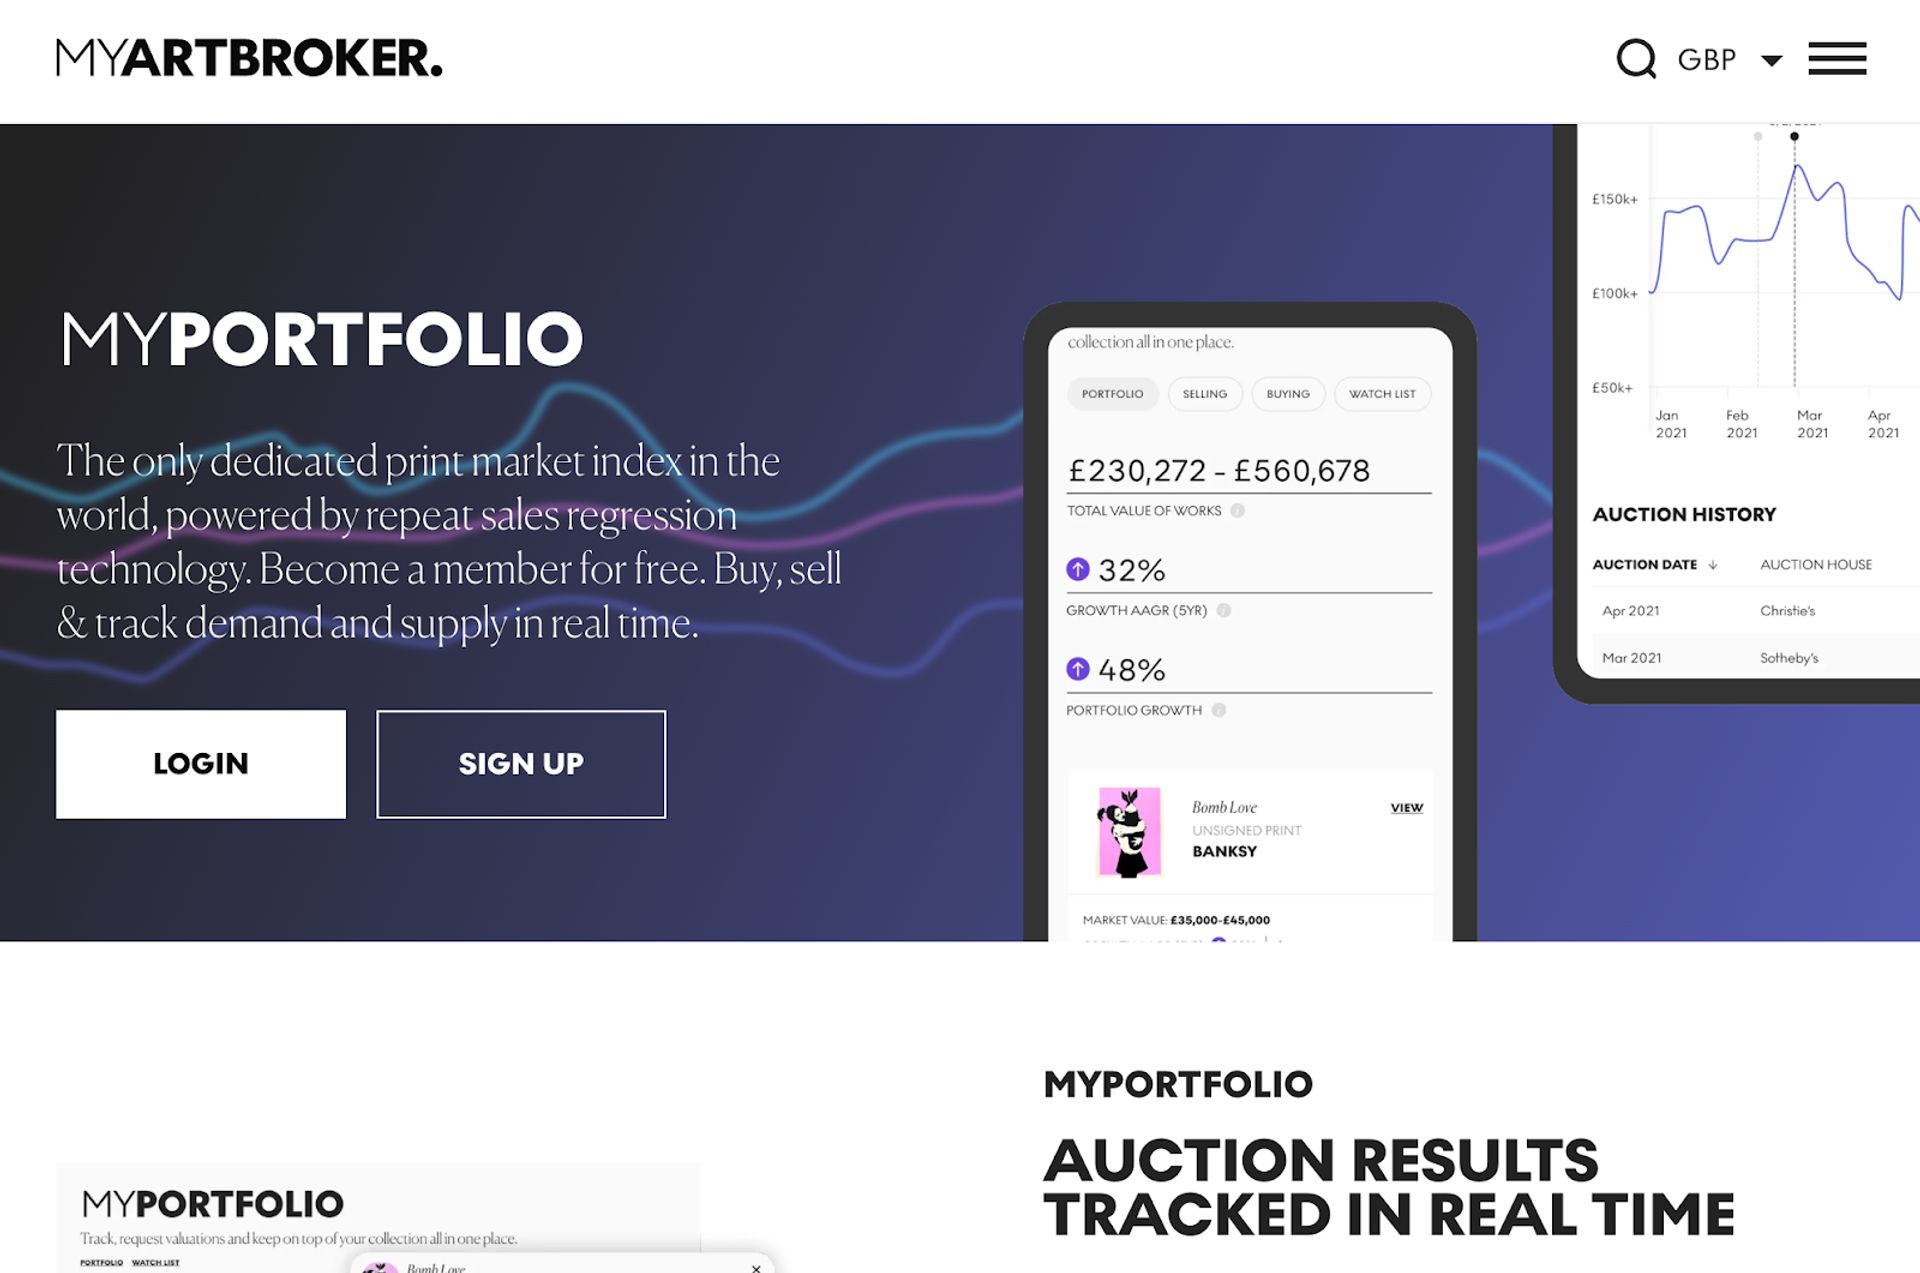 Screenshot of MyArtBroker's MyPortfolio webpage including a graphic of two phone screens. The first phone screen shows the dashboard for MyPortfolio, with an exemplar portfolio. The screen shows the total value of artworks in the portfolio: £230,272-£560,678 and the Growth AAGR: 32%. On the second phone screen, a graph shows the value growth of an artwork over a 5-year period, and the auction history of that artwork.